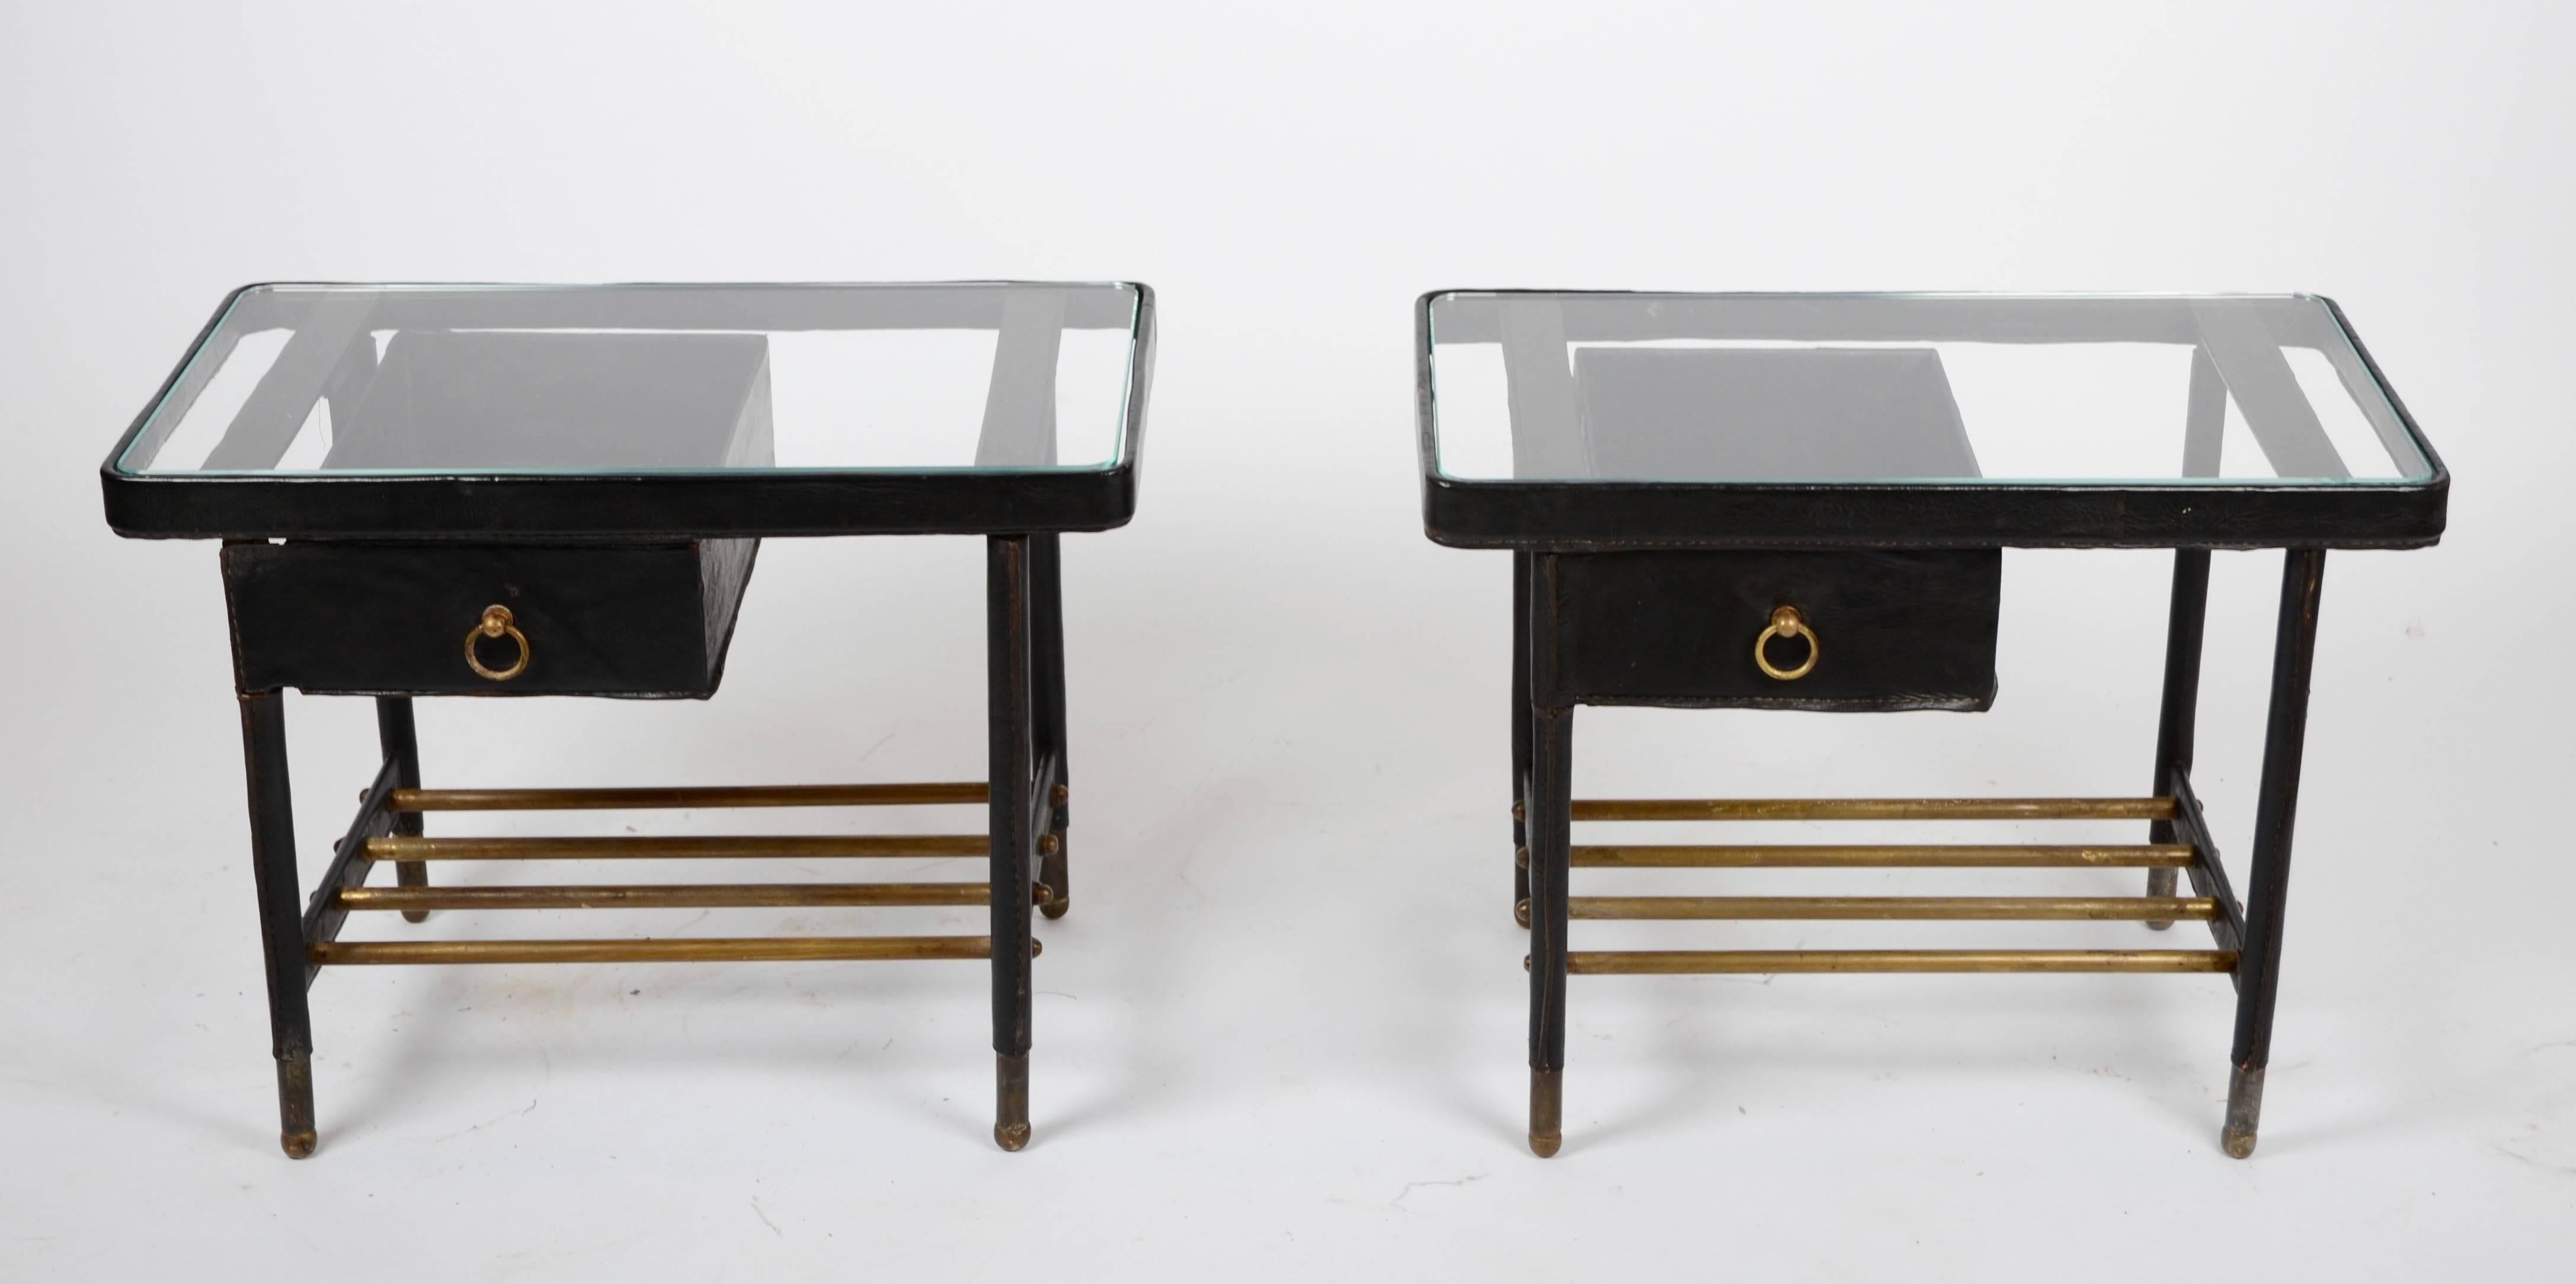 A pair of side tables with drawers, designed by Jacques Adnet, 1950s. Made in leather-bound tubular metal, glass and brass.